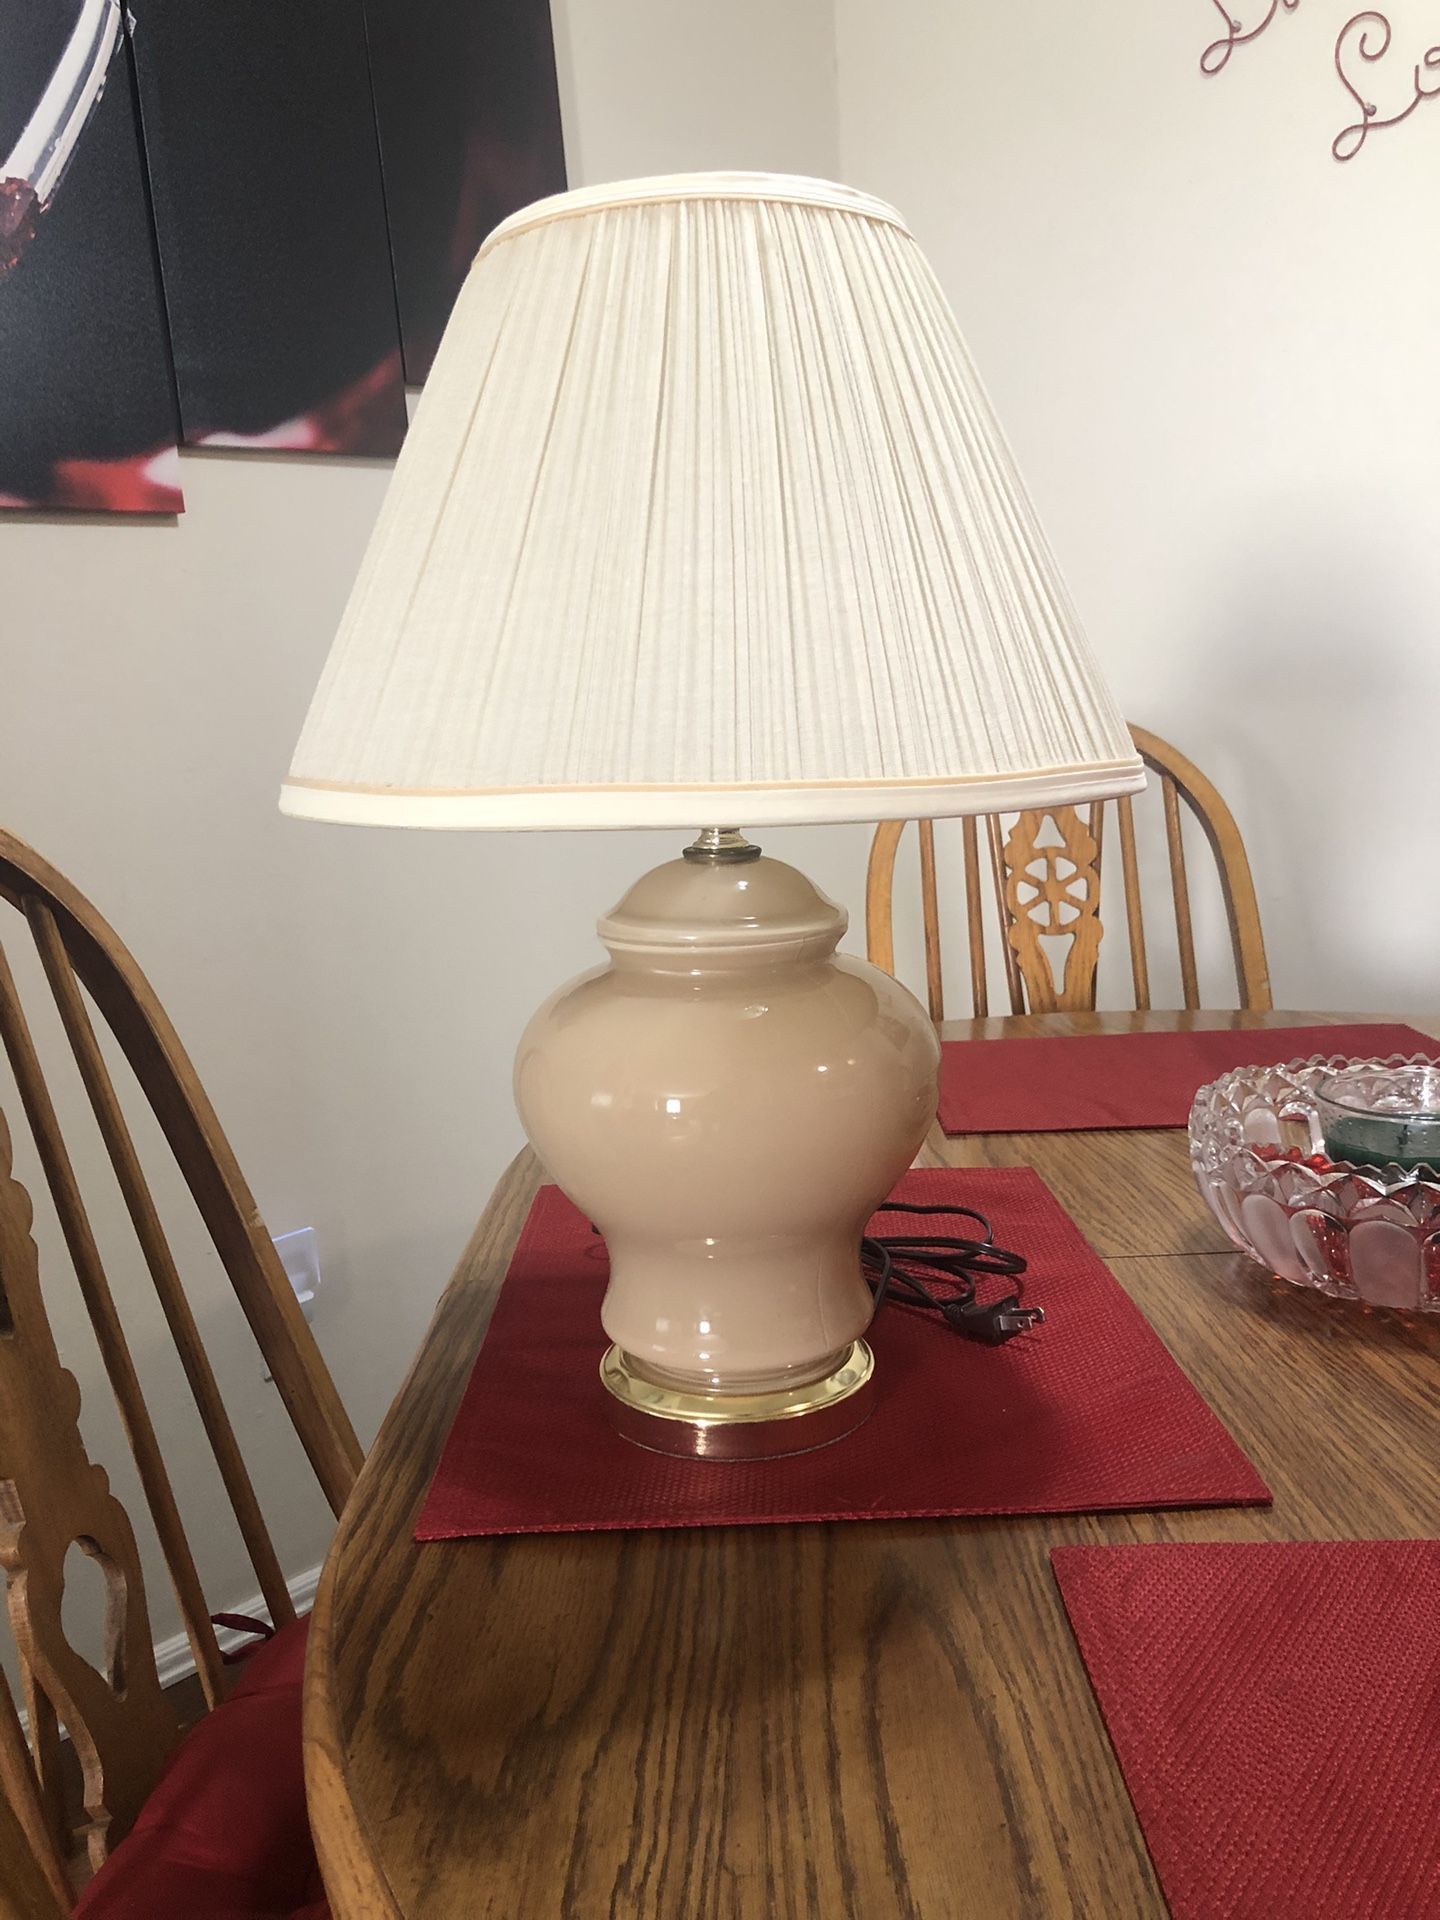 Small Glass Table Lamp